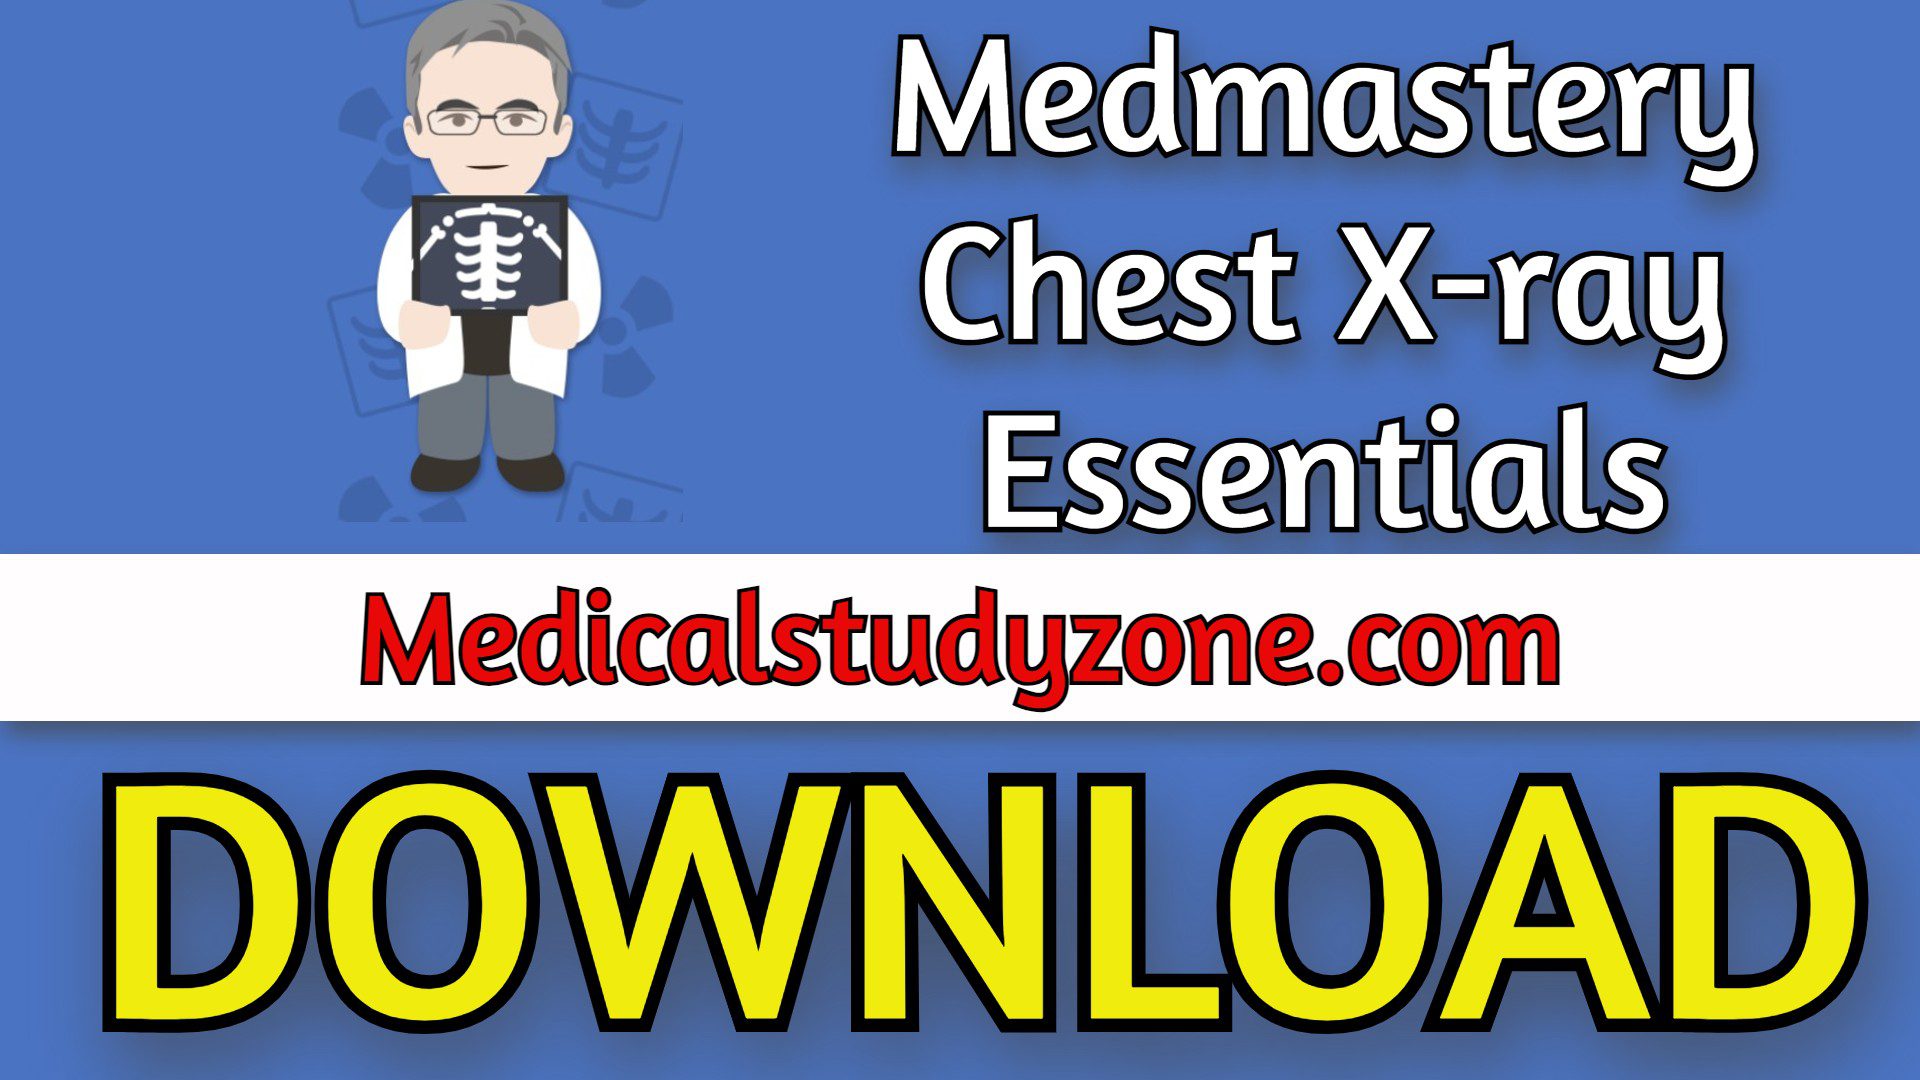 Medmastery Chest X-ray Essentials 2021 Free Download